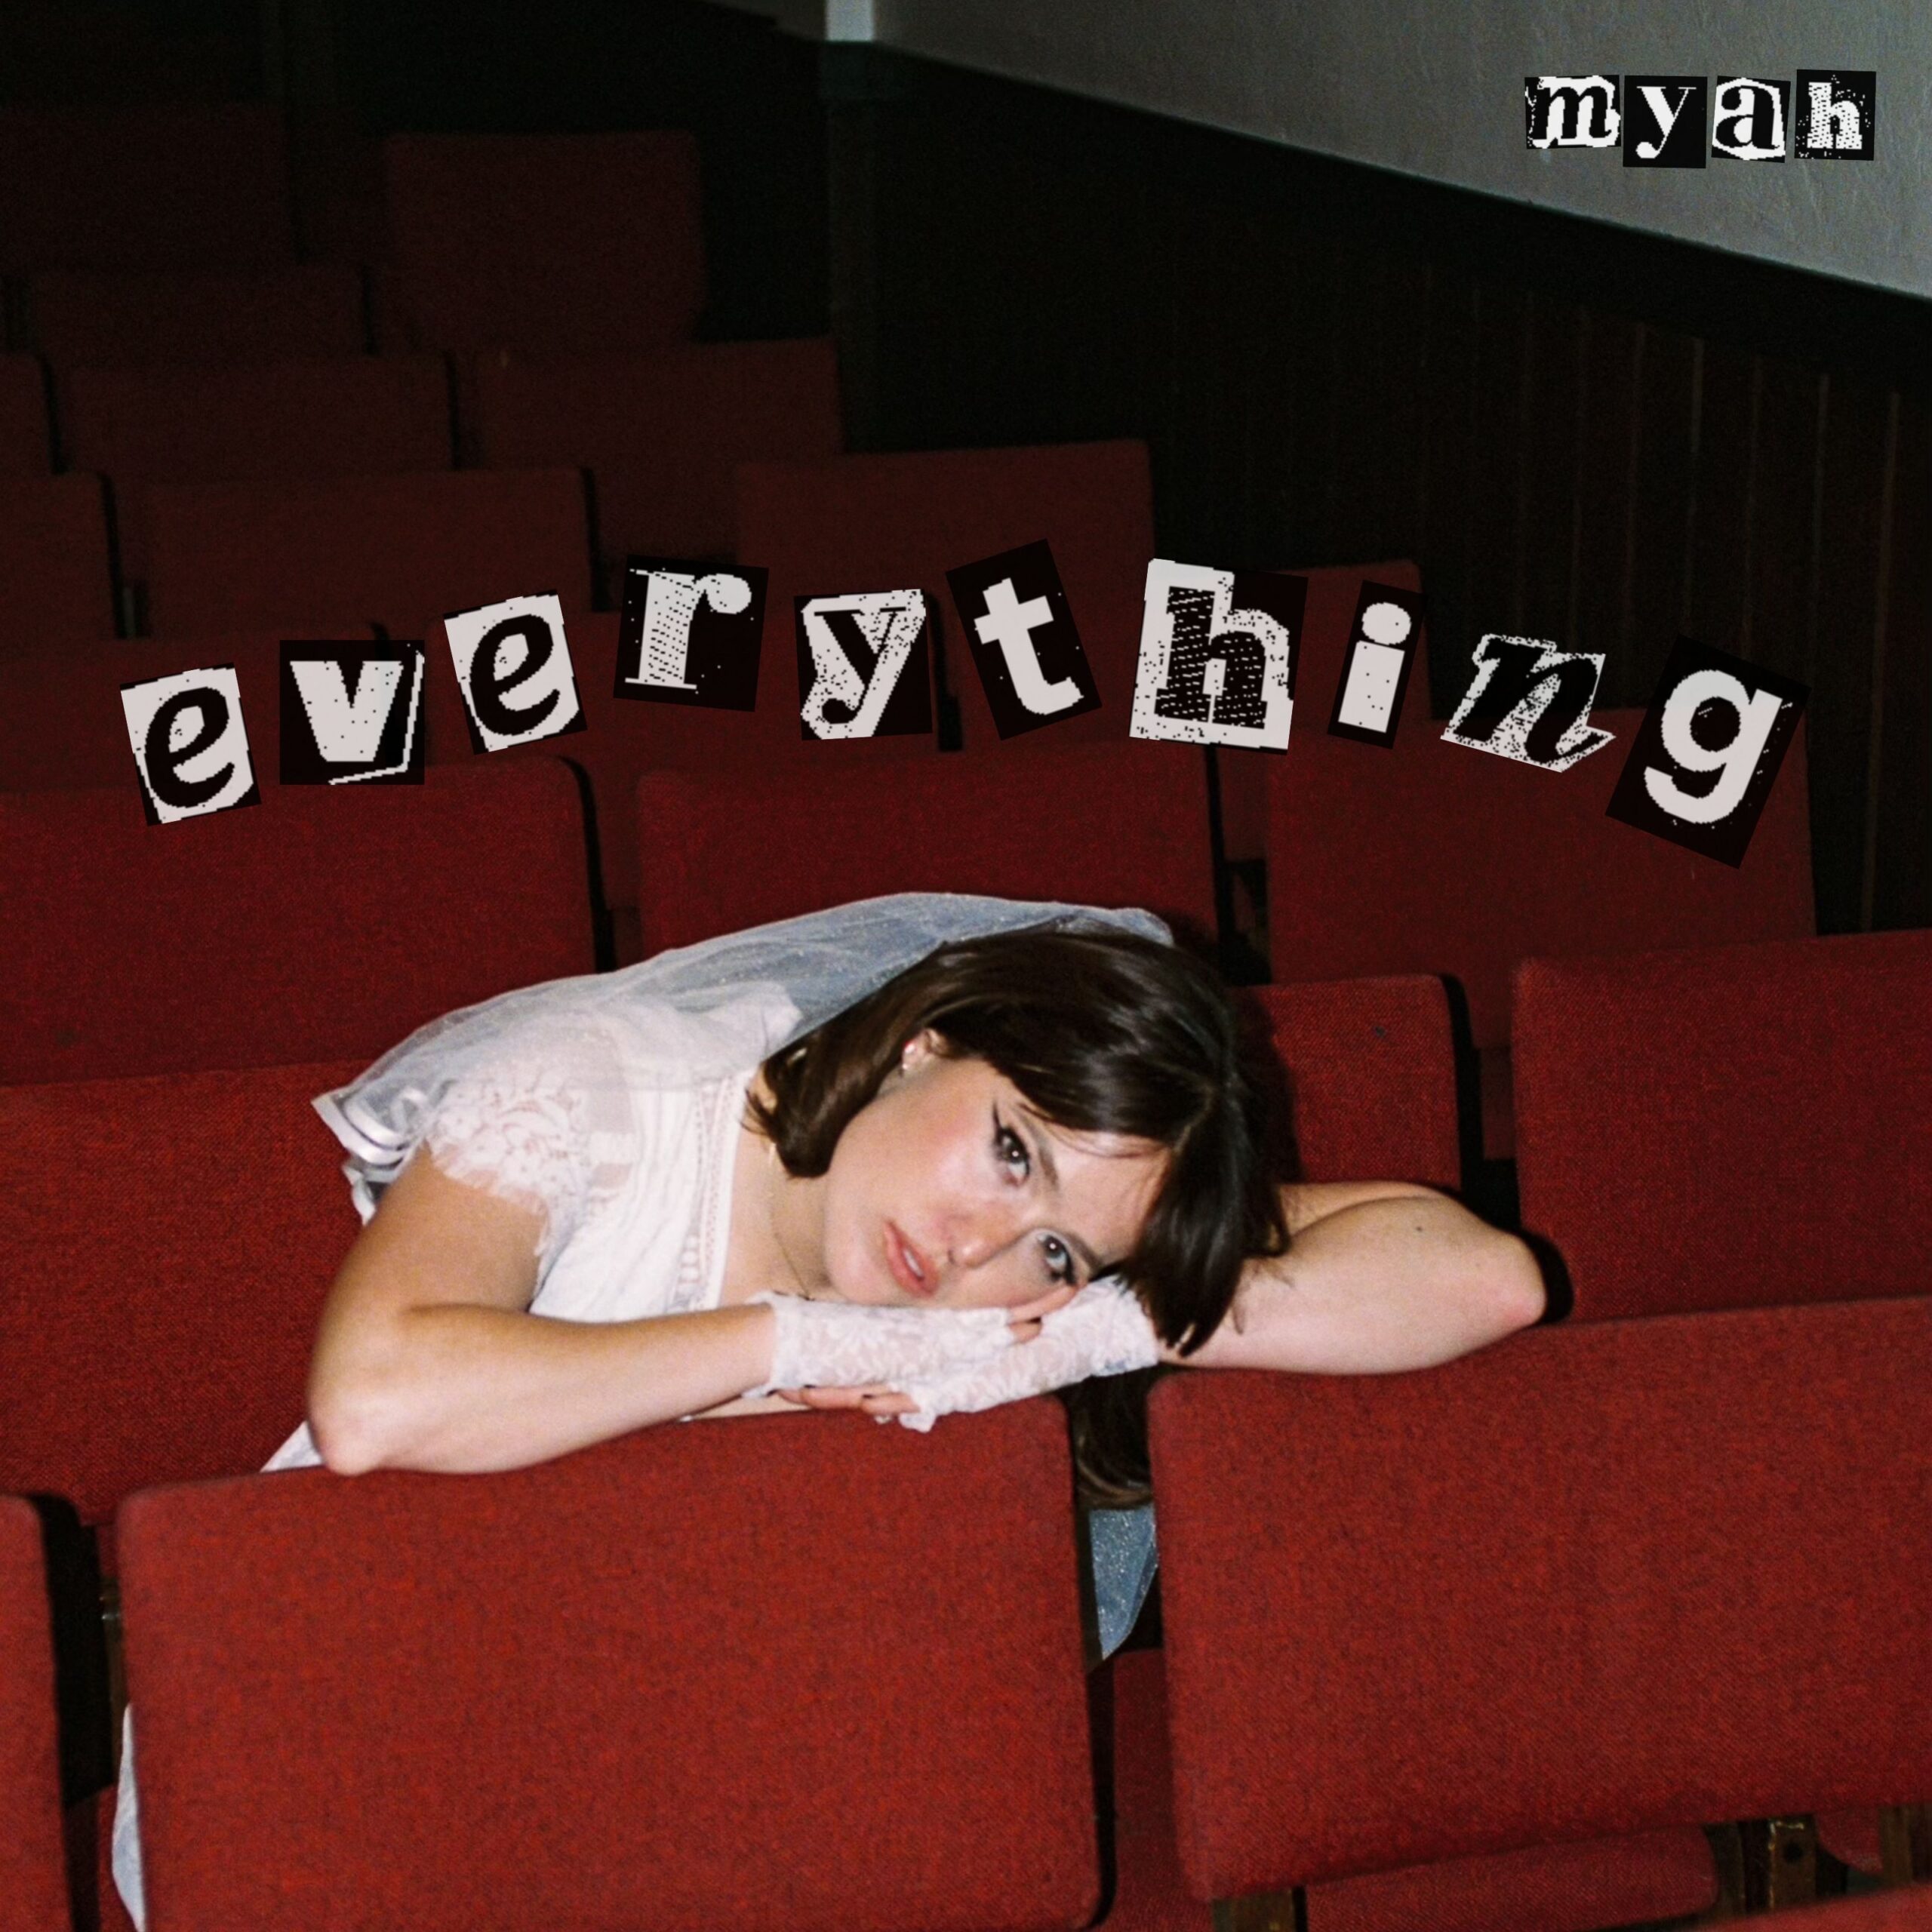 MYAH’s “everything”: A Heartfelt Exploration of Love and Loss